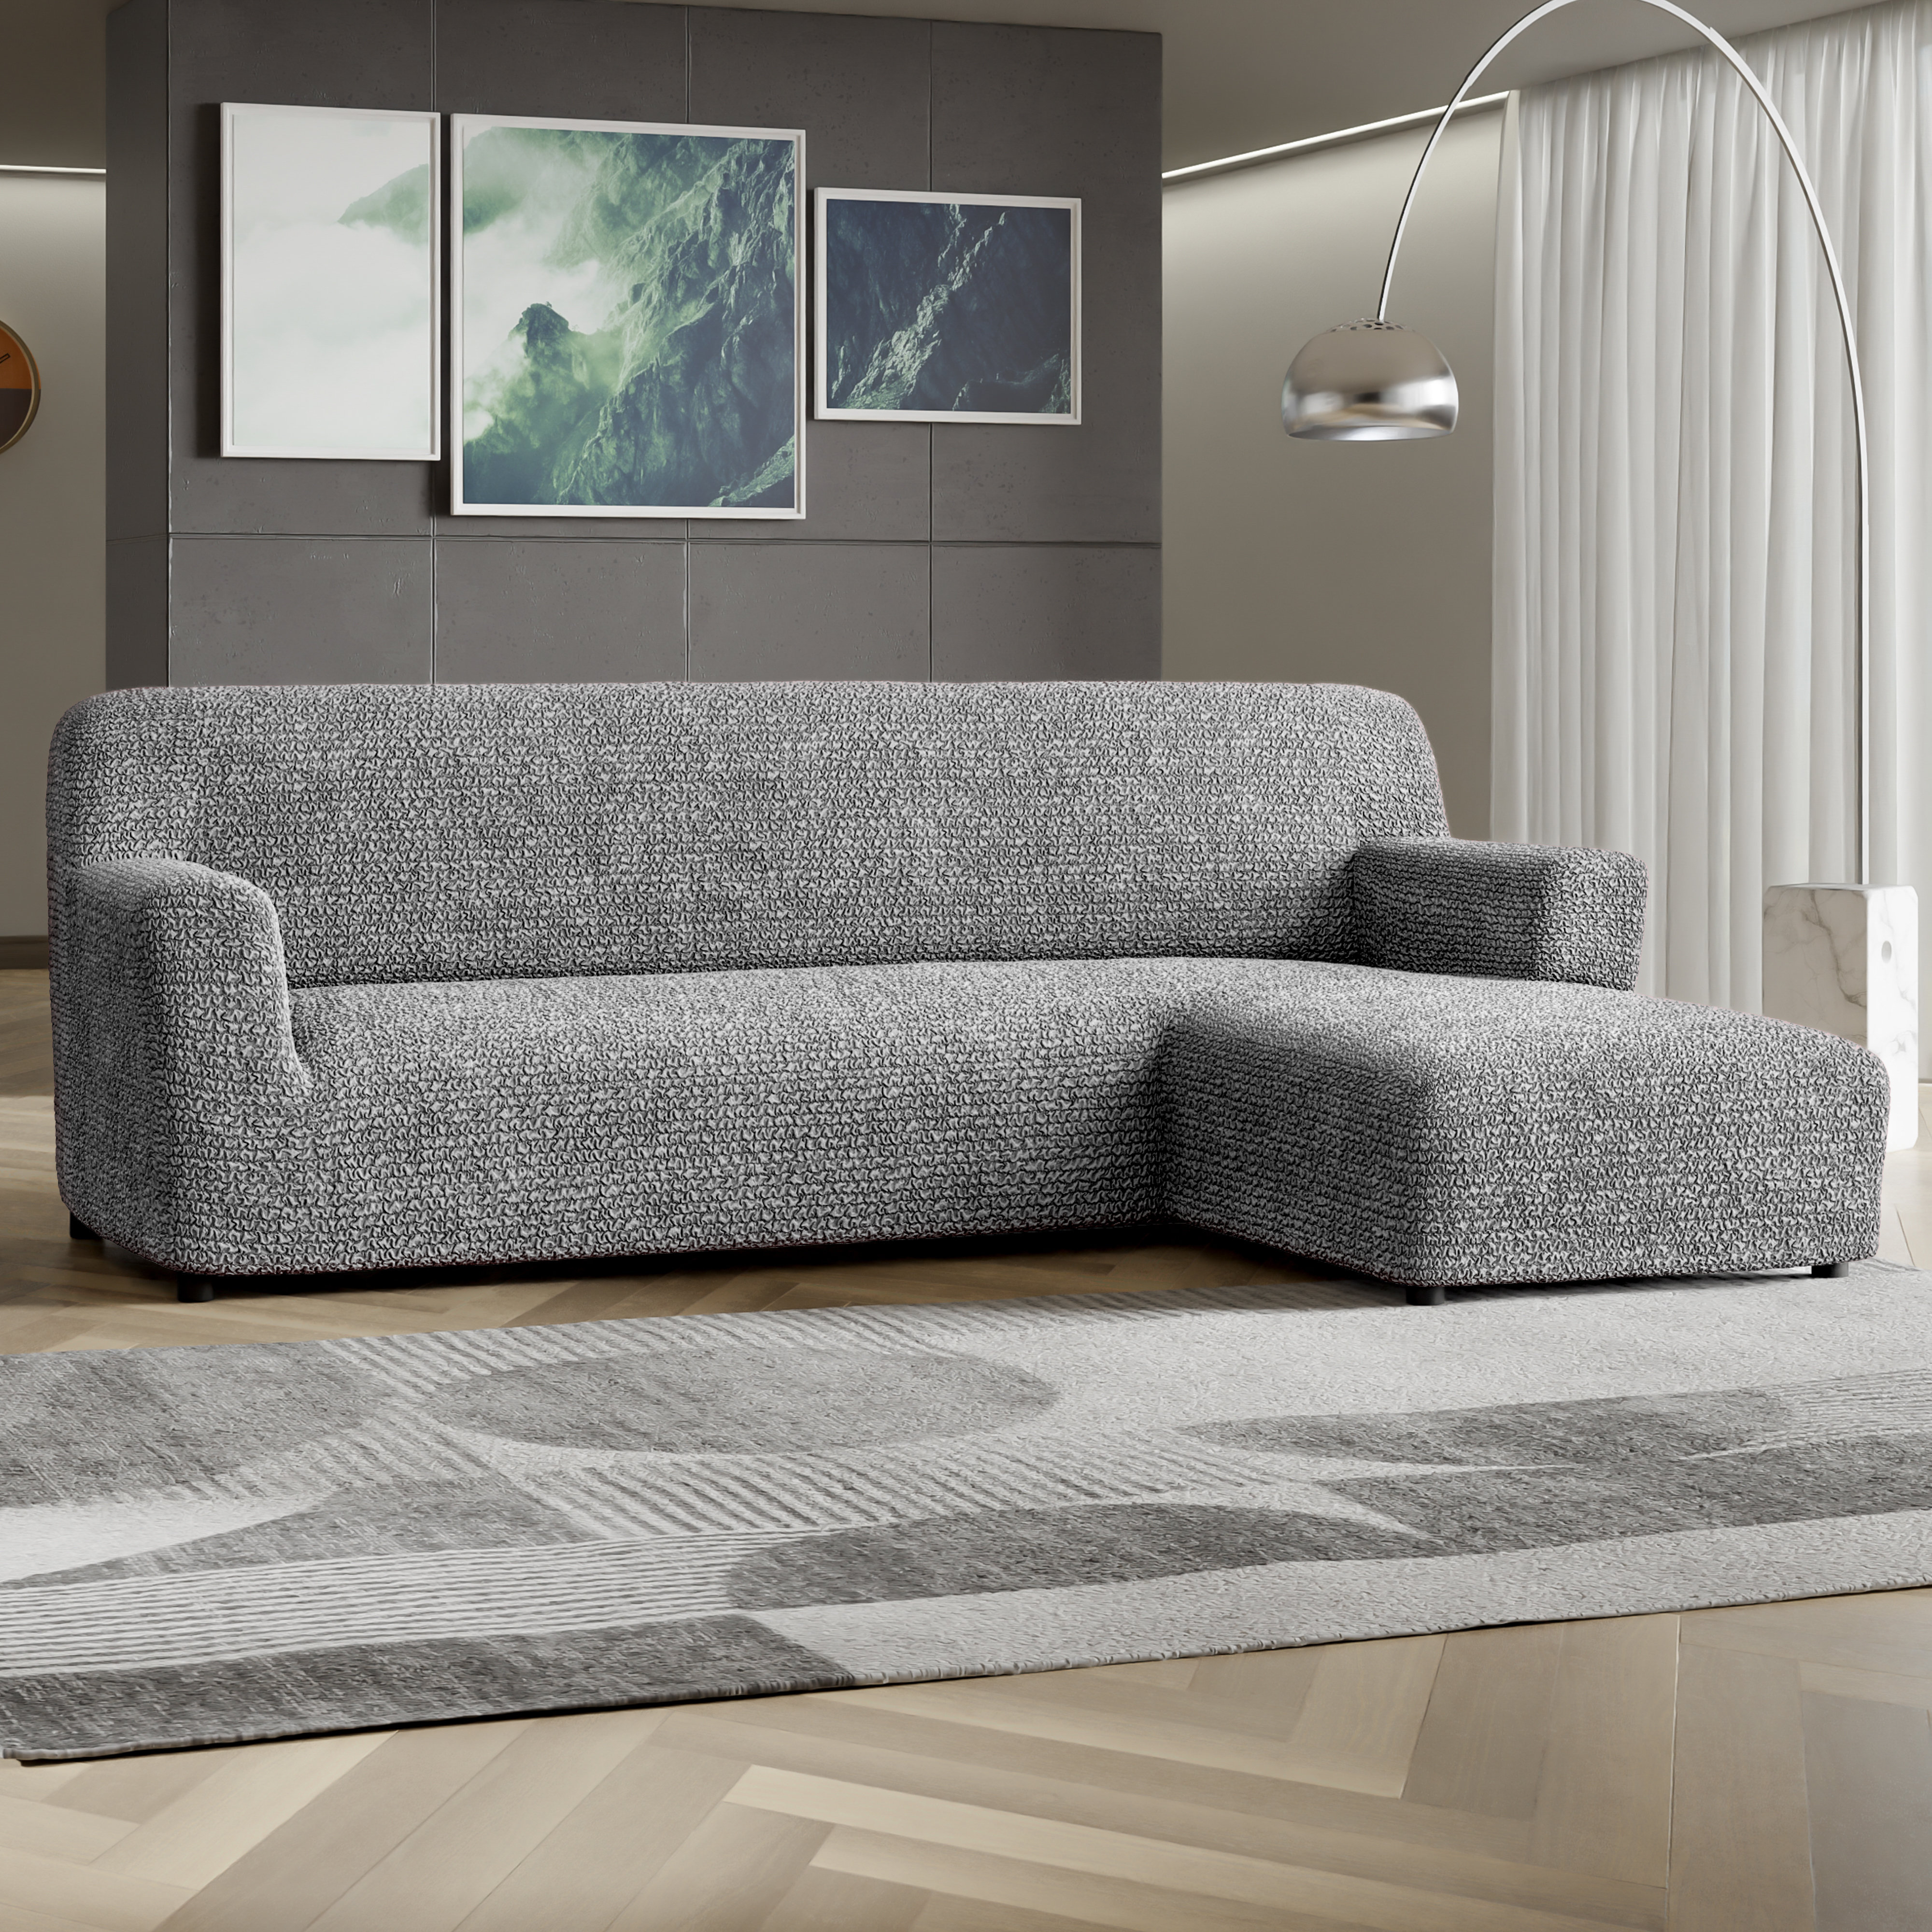 Microfibra Collection Stretch Sectional Sofa Slipcover - Easy to Clean & Durable (Right Chaise) PAULATO by GA.I.CO. Fabric: Light Gray